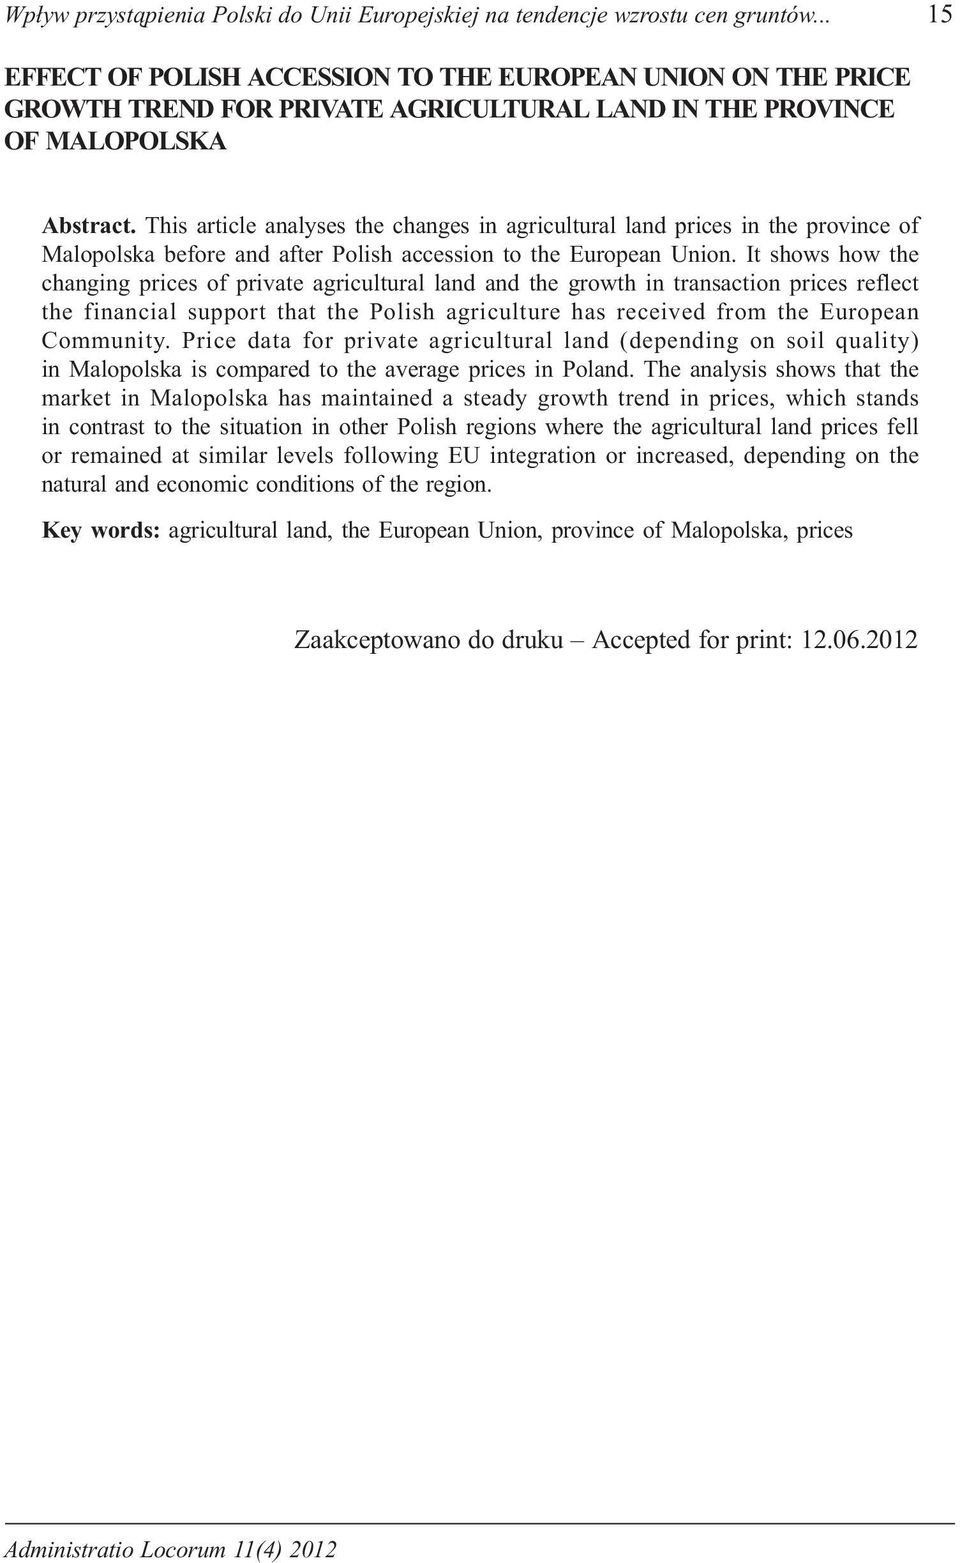 This article analyses the changes in agricultural land prices in the province of Malopolska before and after Polish accession to the European Union.